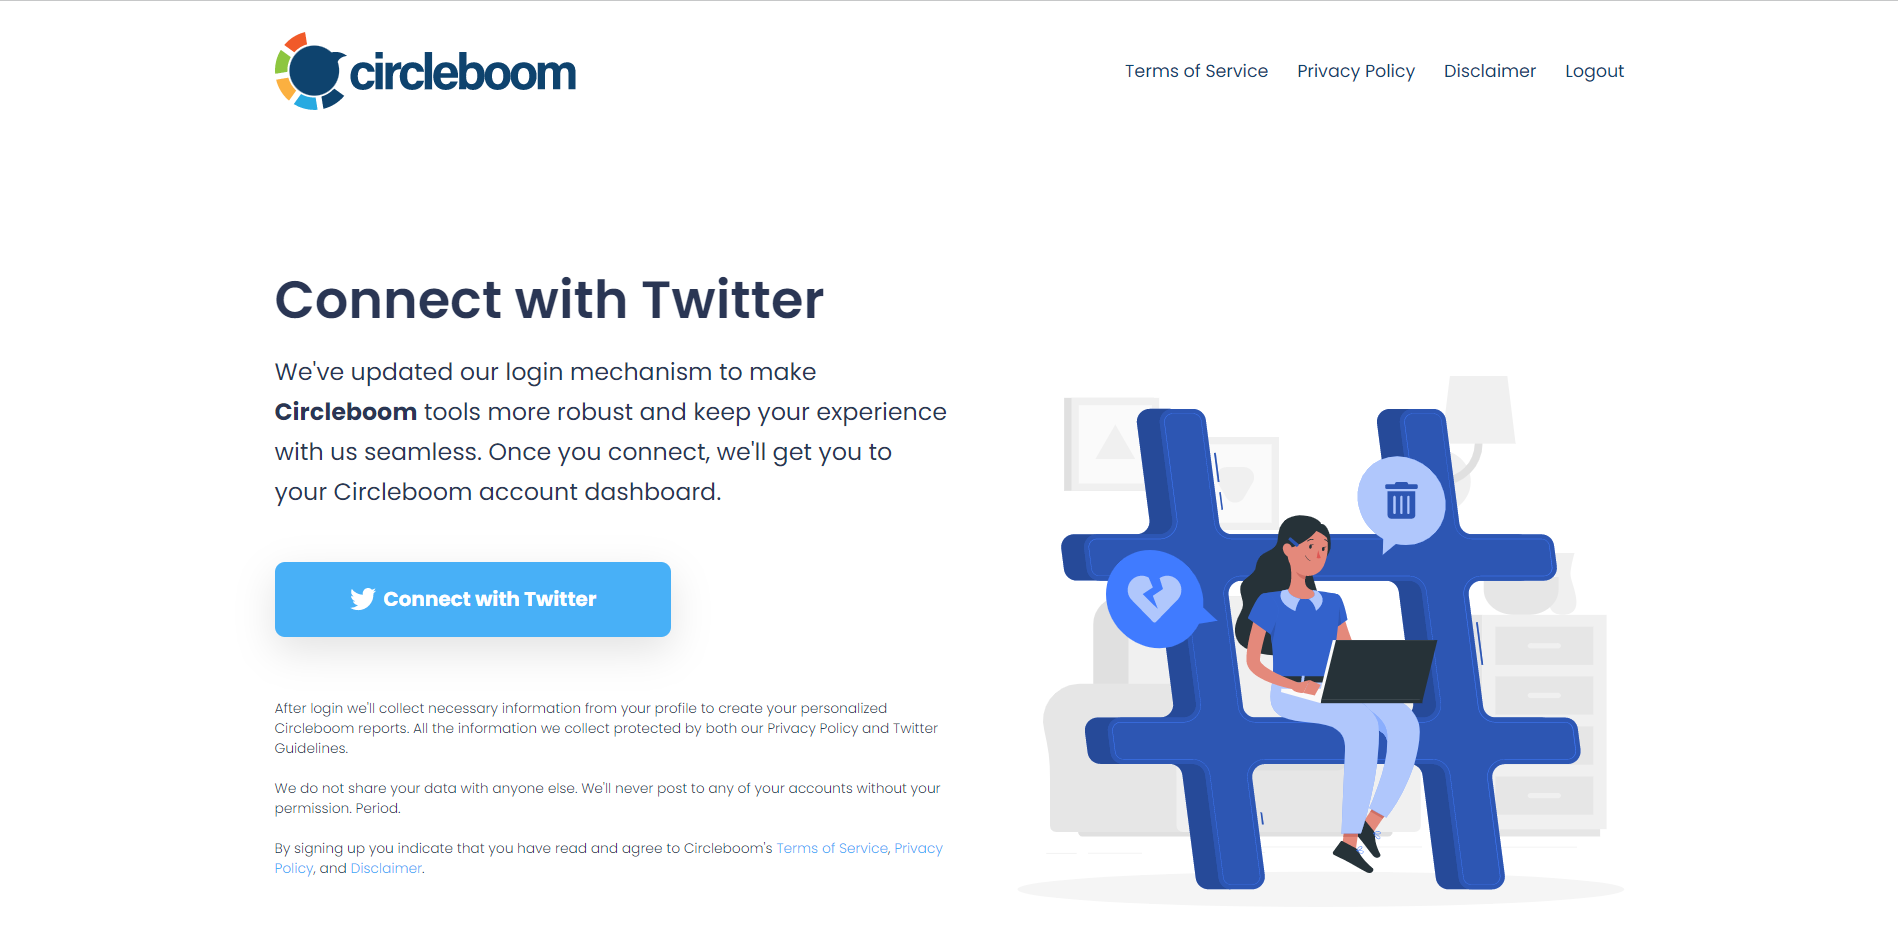 You should log into Circleboom Twitter and connect your Twitter account.